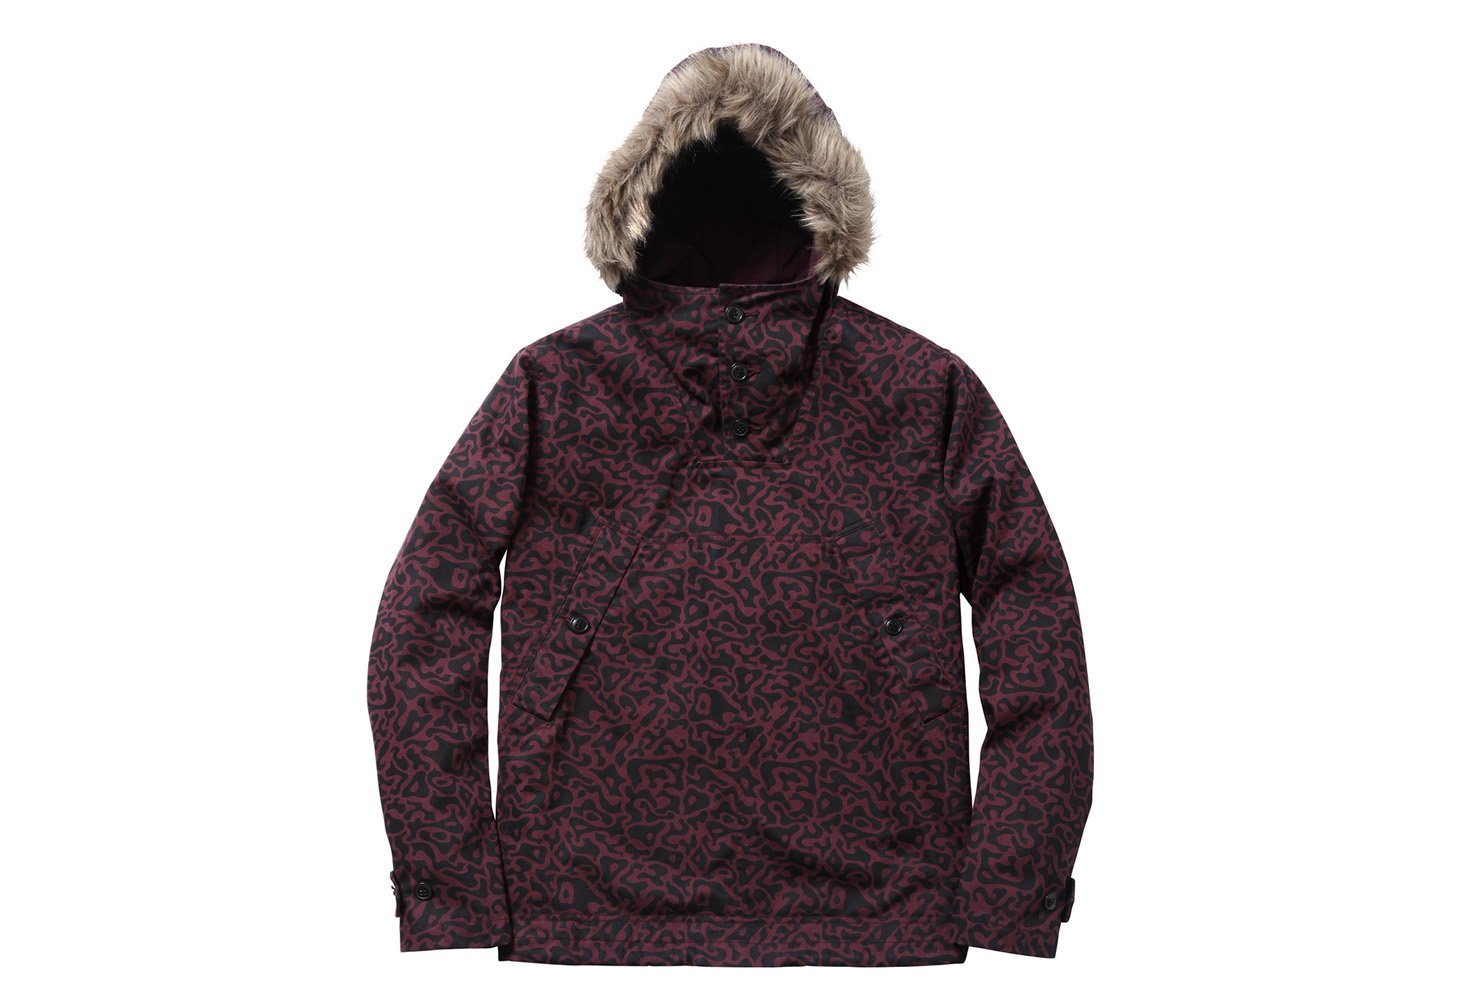 Supreme - Pacific Camo Pullover Jacket - ParkSIDER